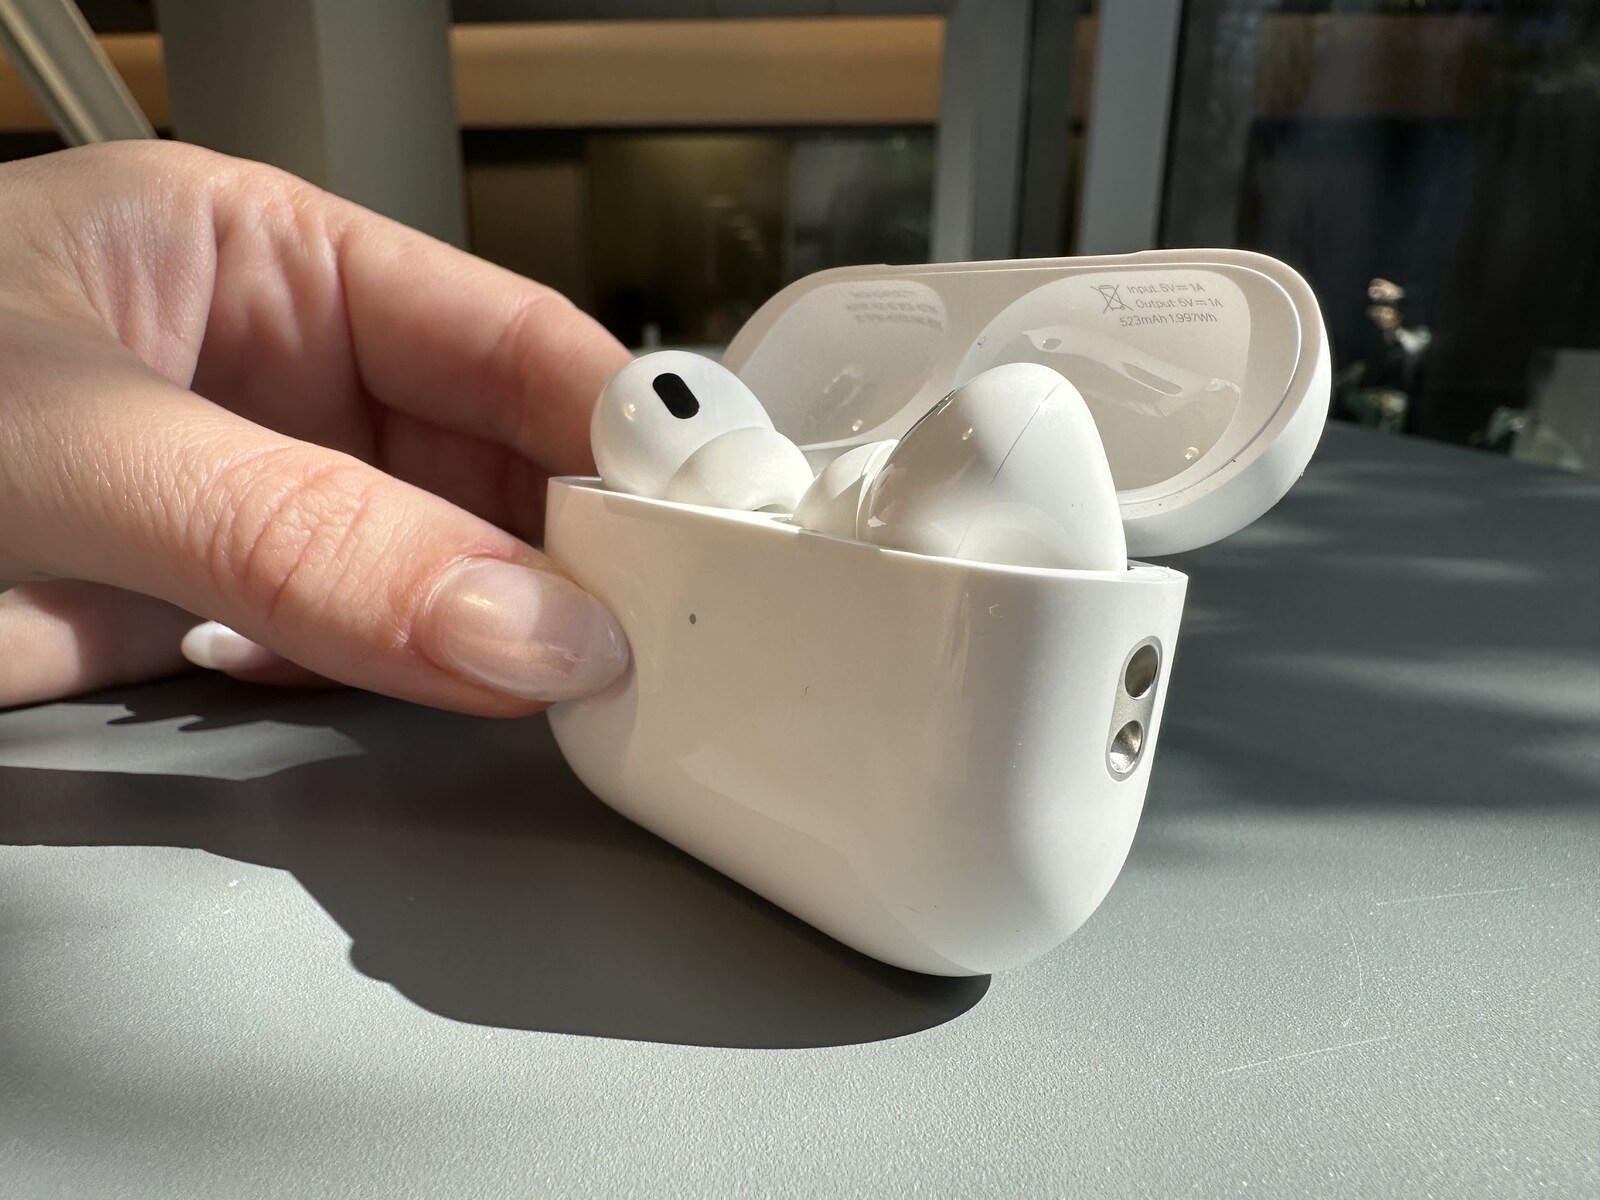 How To Turn On Noise Cancellation On Airpods Pro